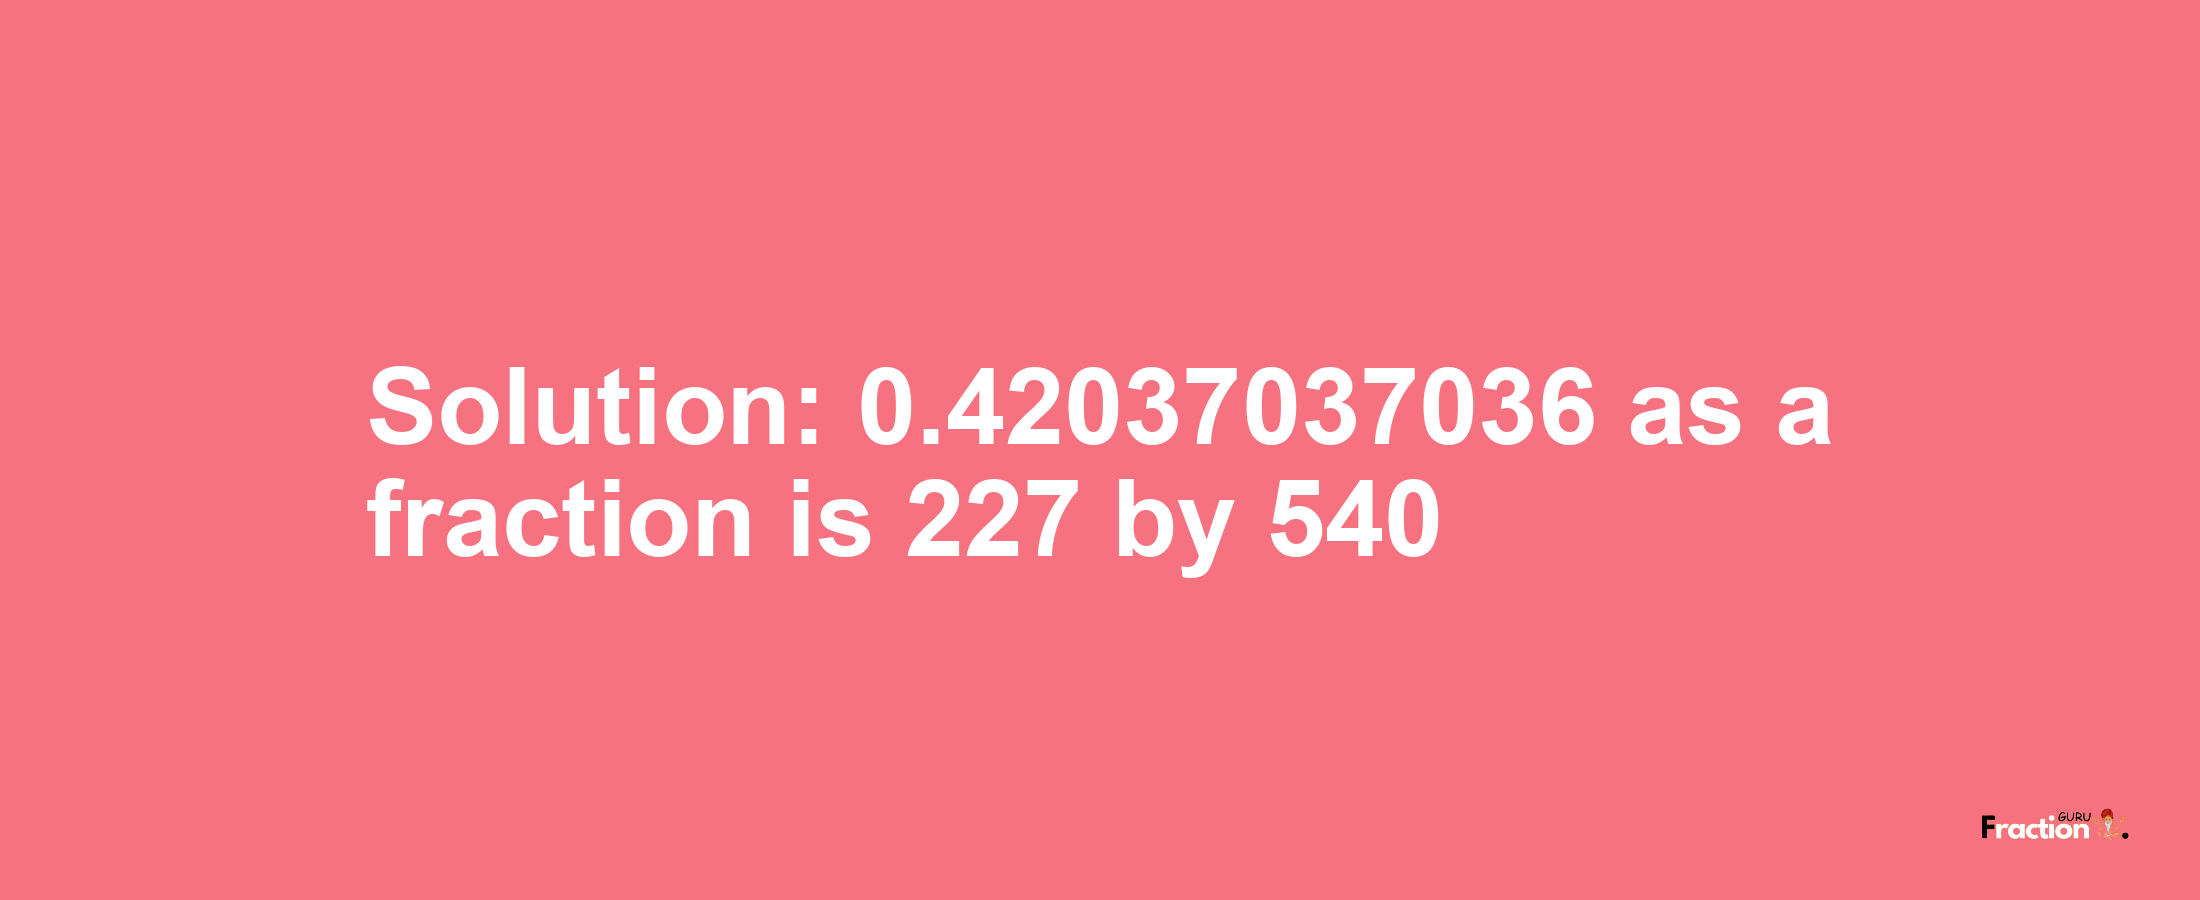 Solution:0.42037037036 as a fraction is 227/540